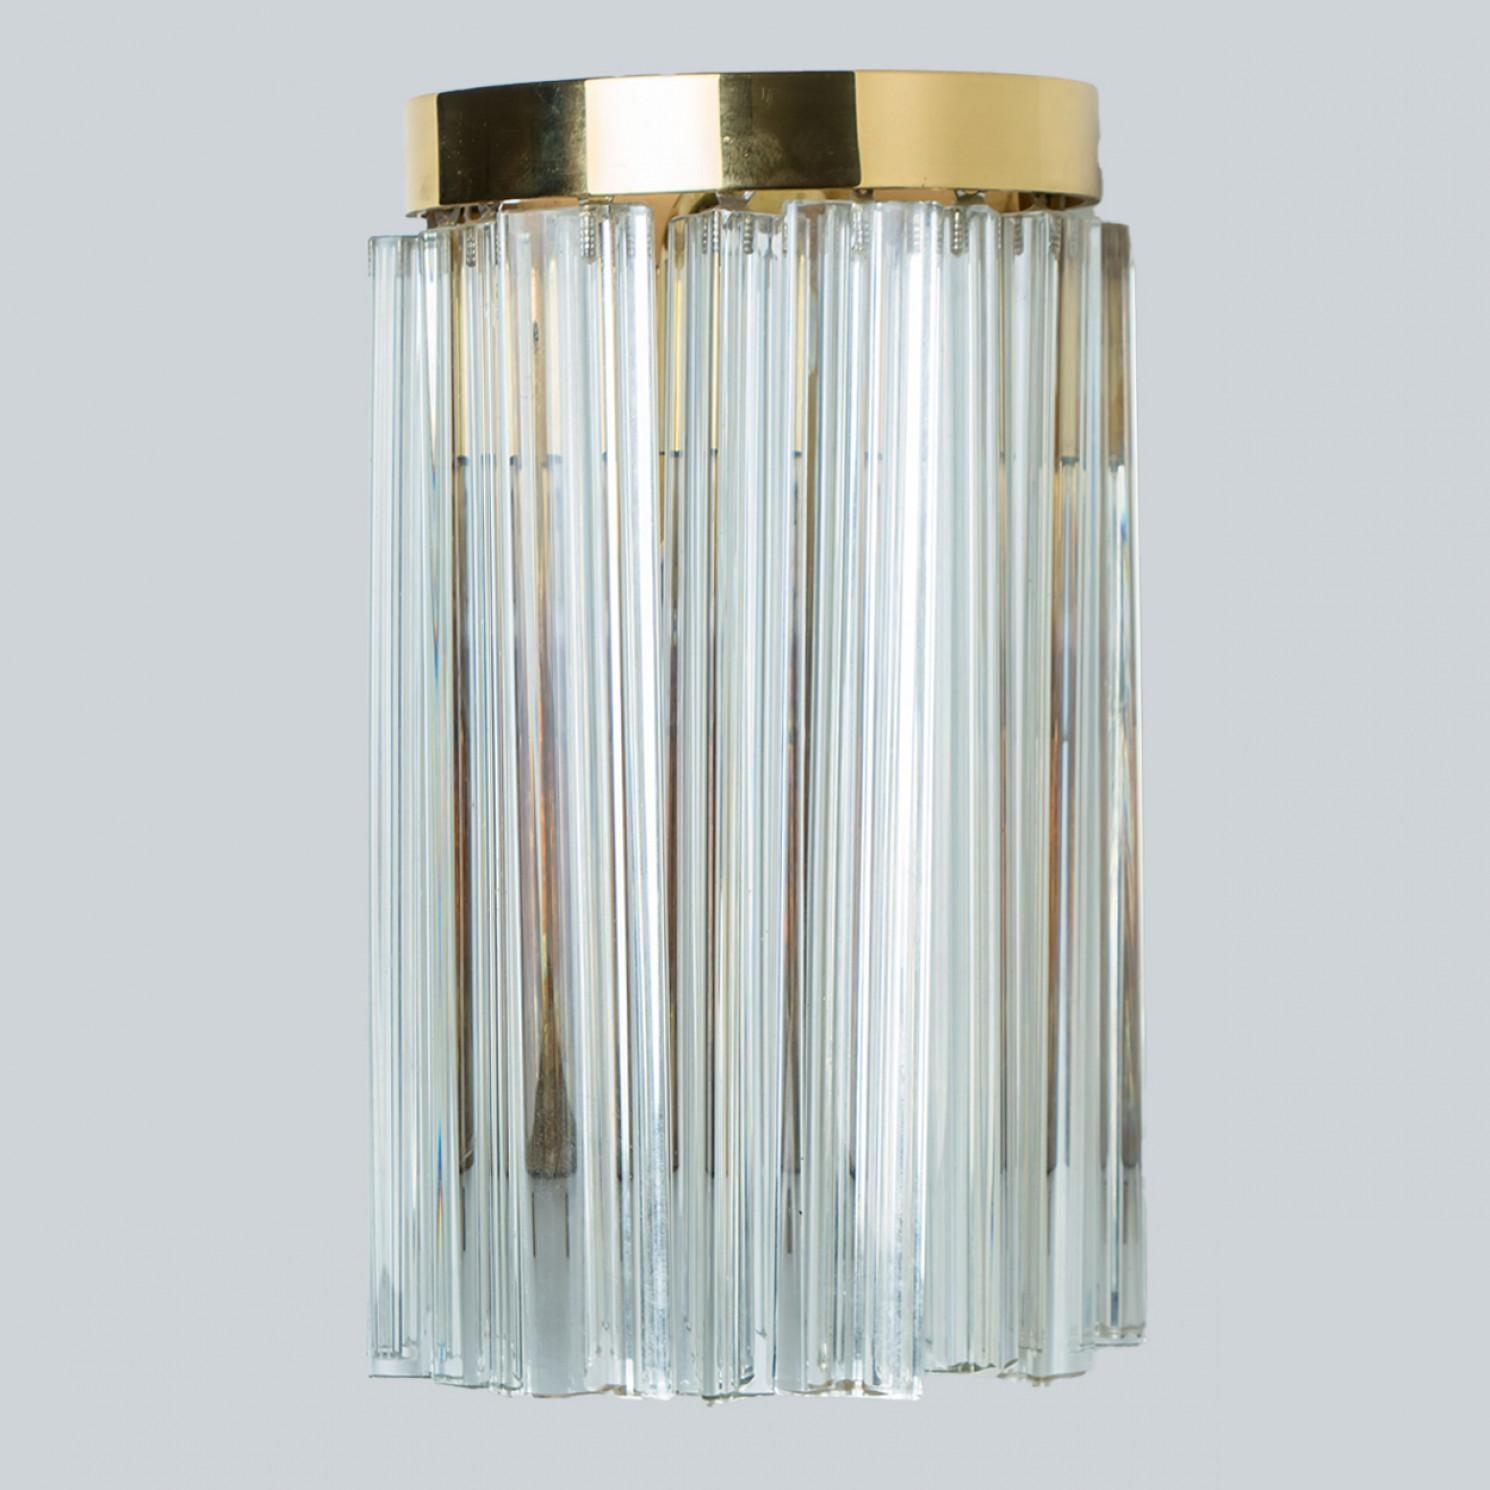 A Pair of Venini Clear Brass Glass Wall Lights, 1970 For Sale 2